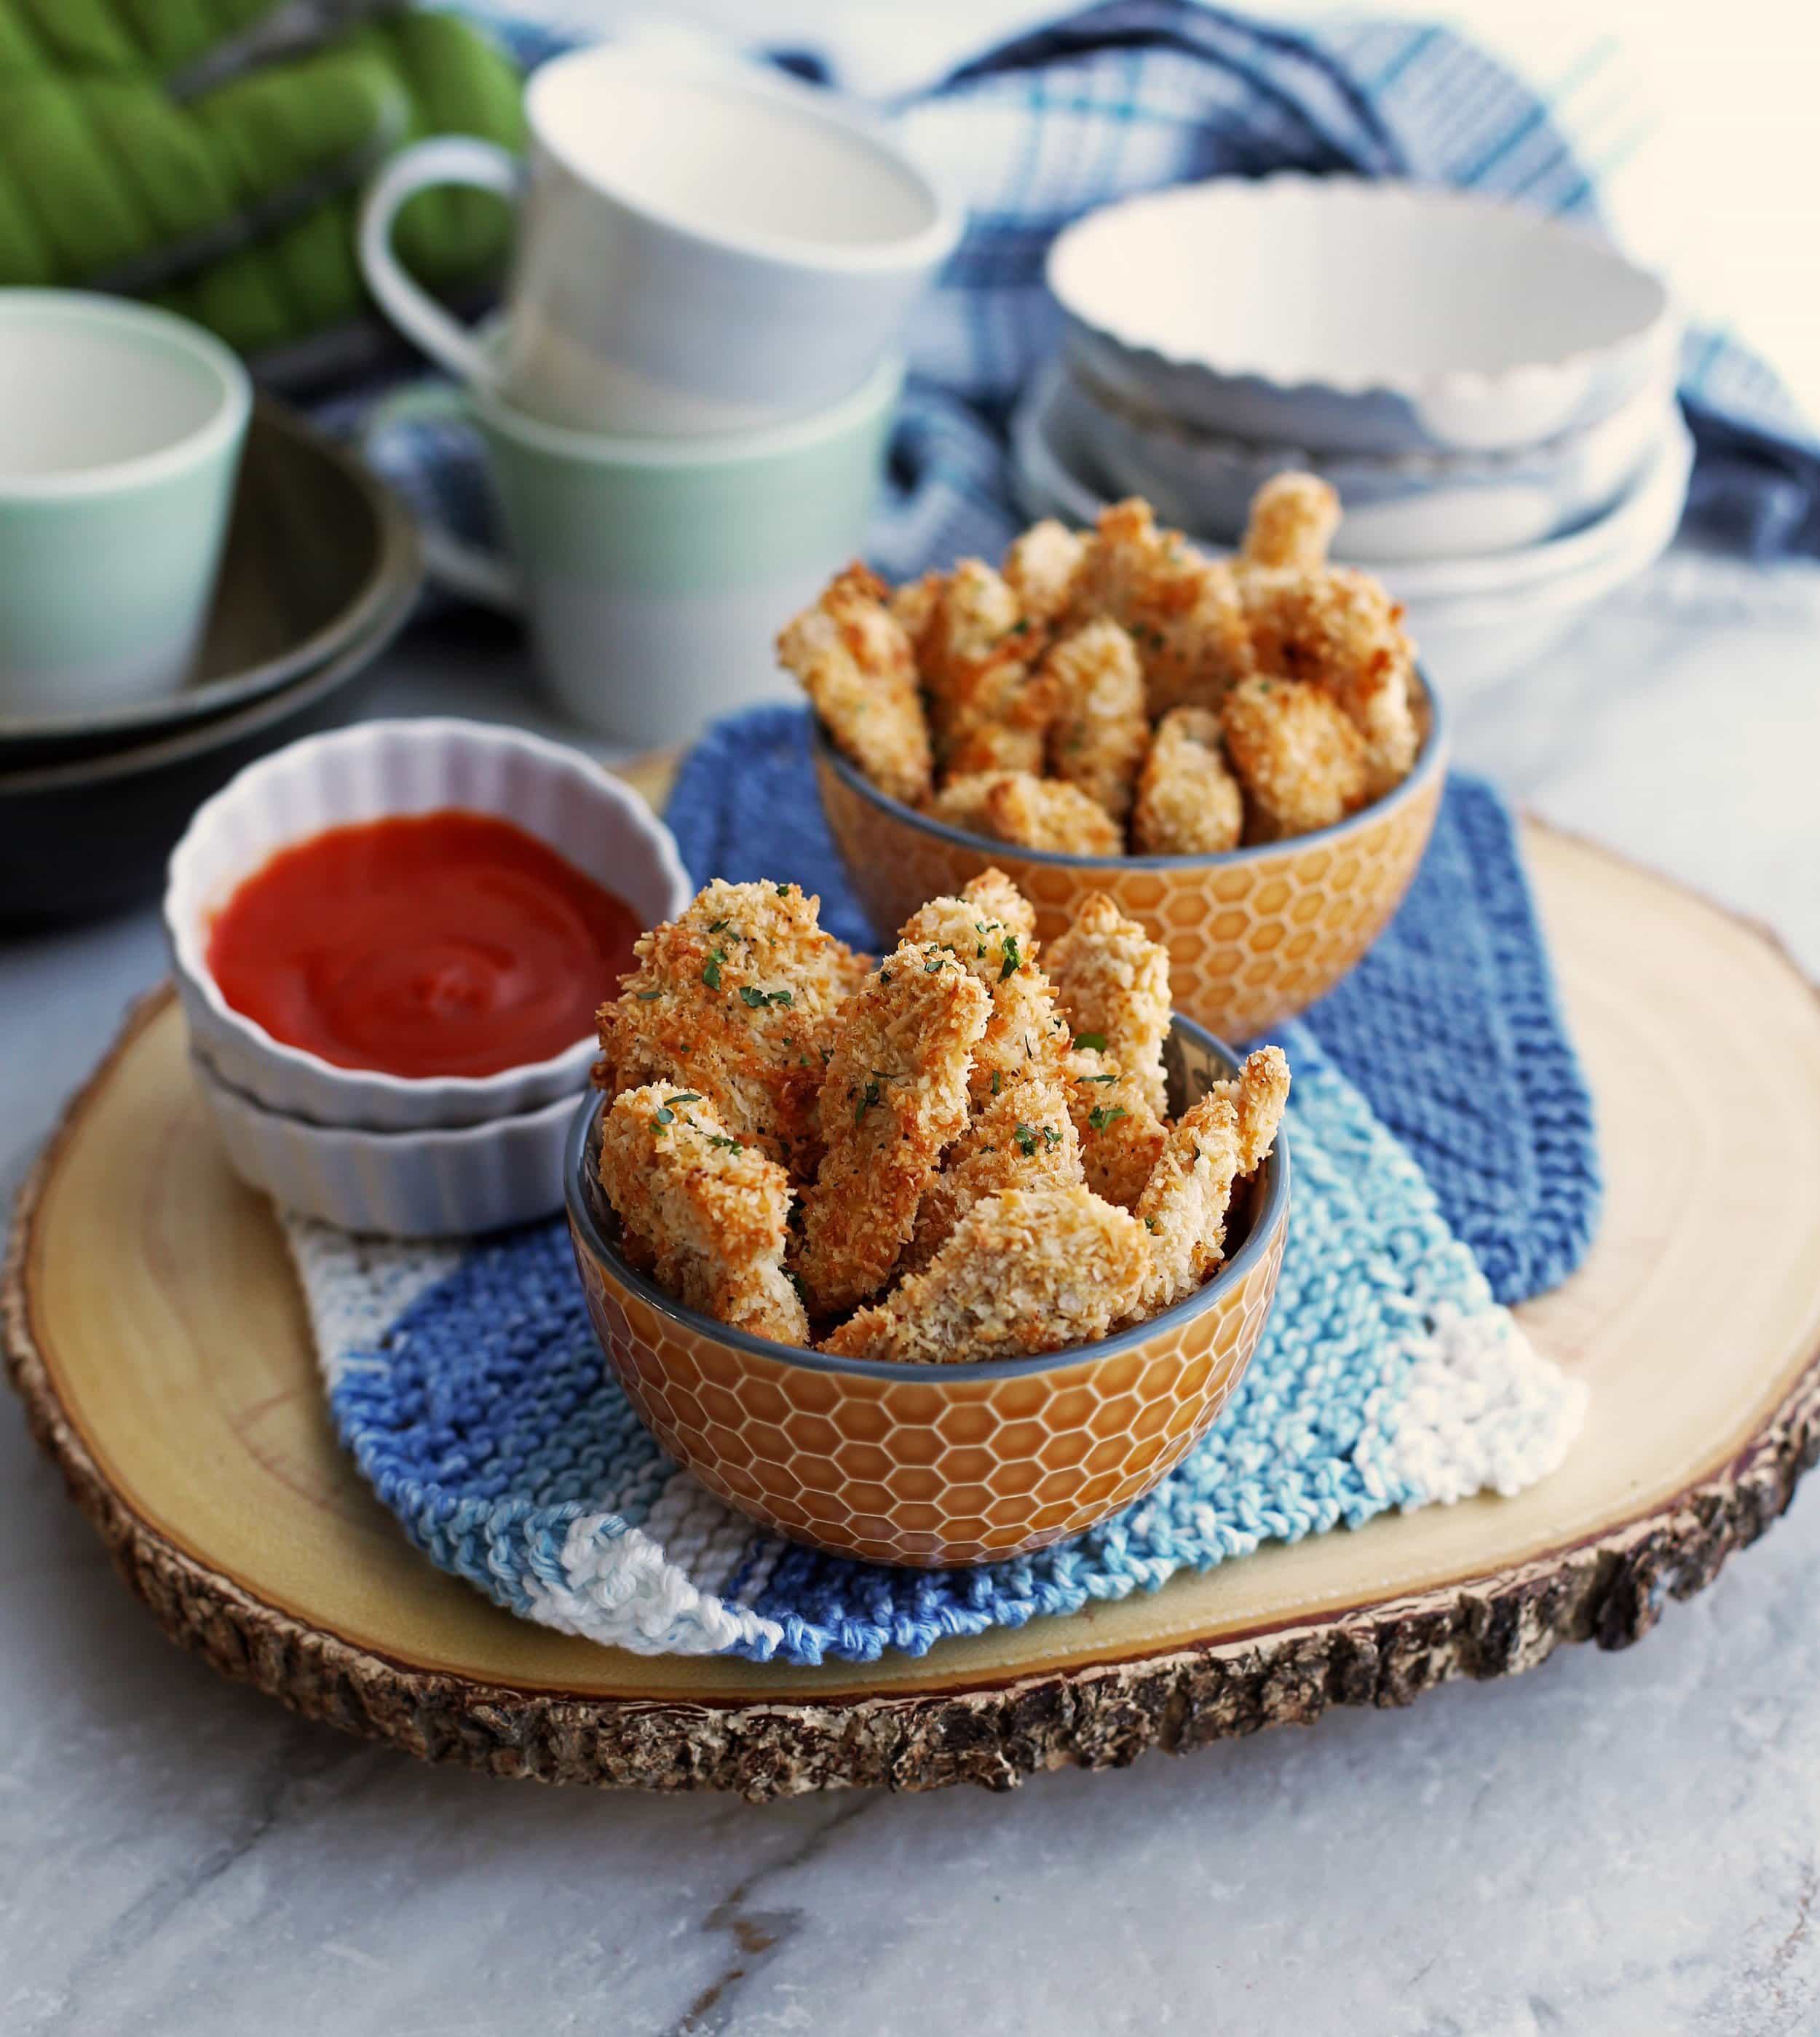 A top angled view of two bowls of baked crispy coconut chicken nuggets with red sauce on the side.